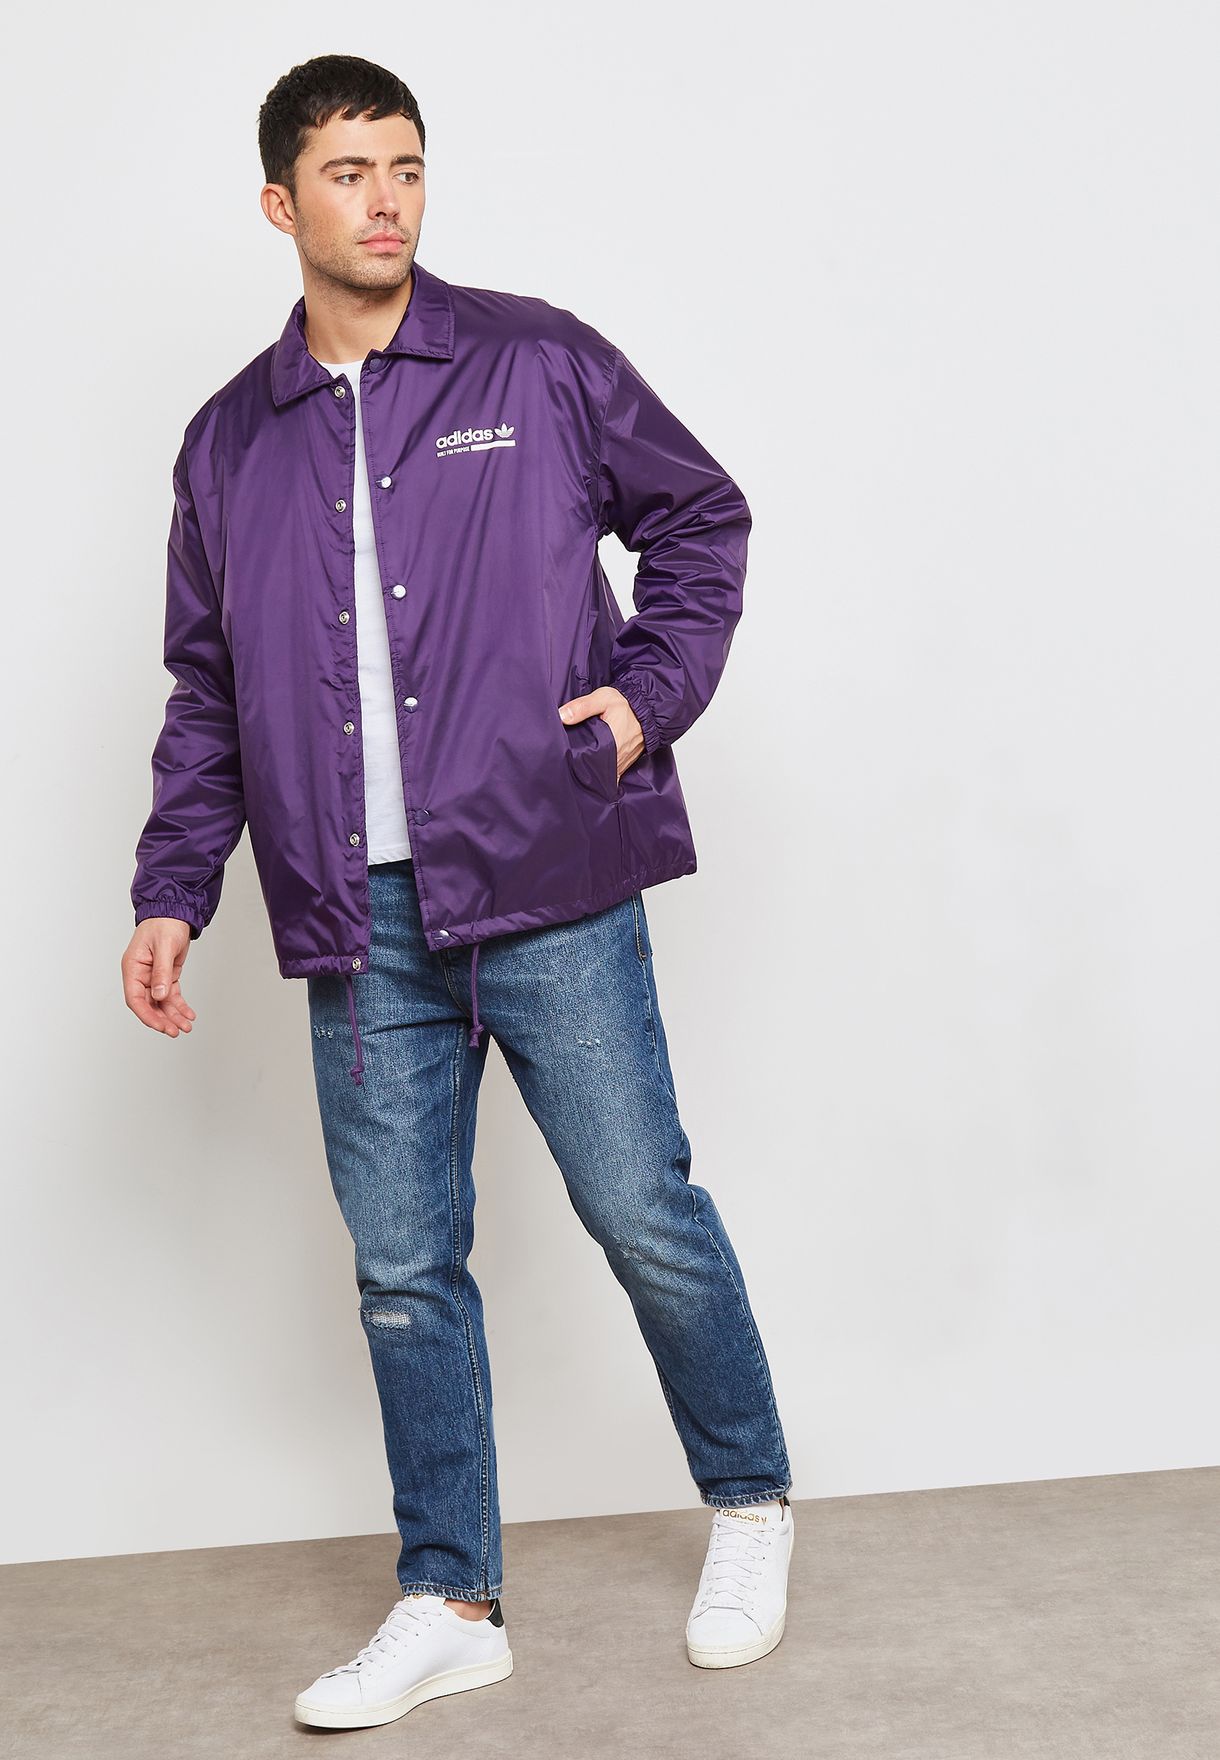 Buy adidas Originals purple Kaval Jacket for Men in Manama, other cities |  DH4965